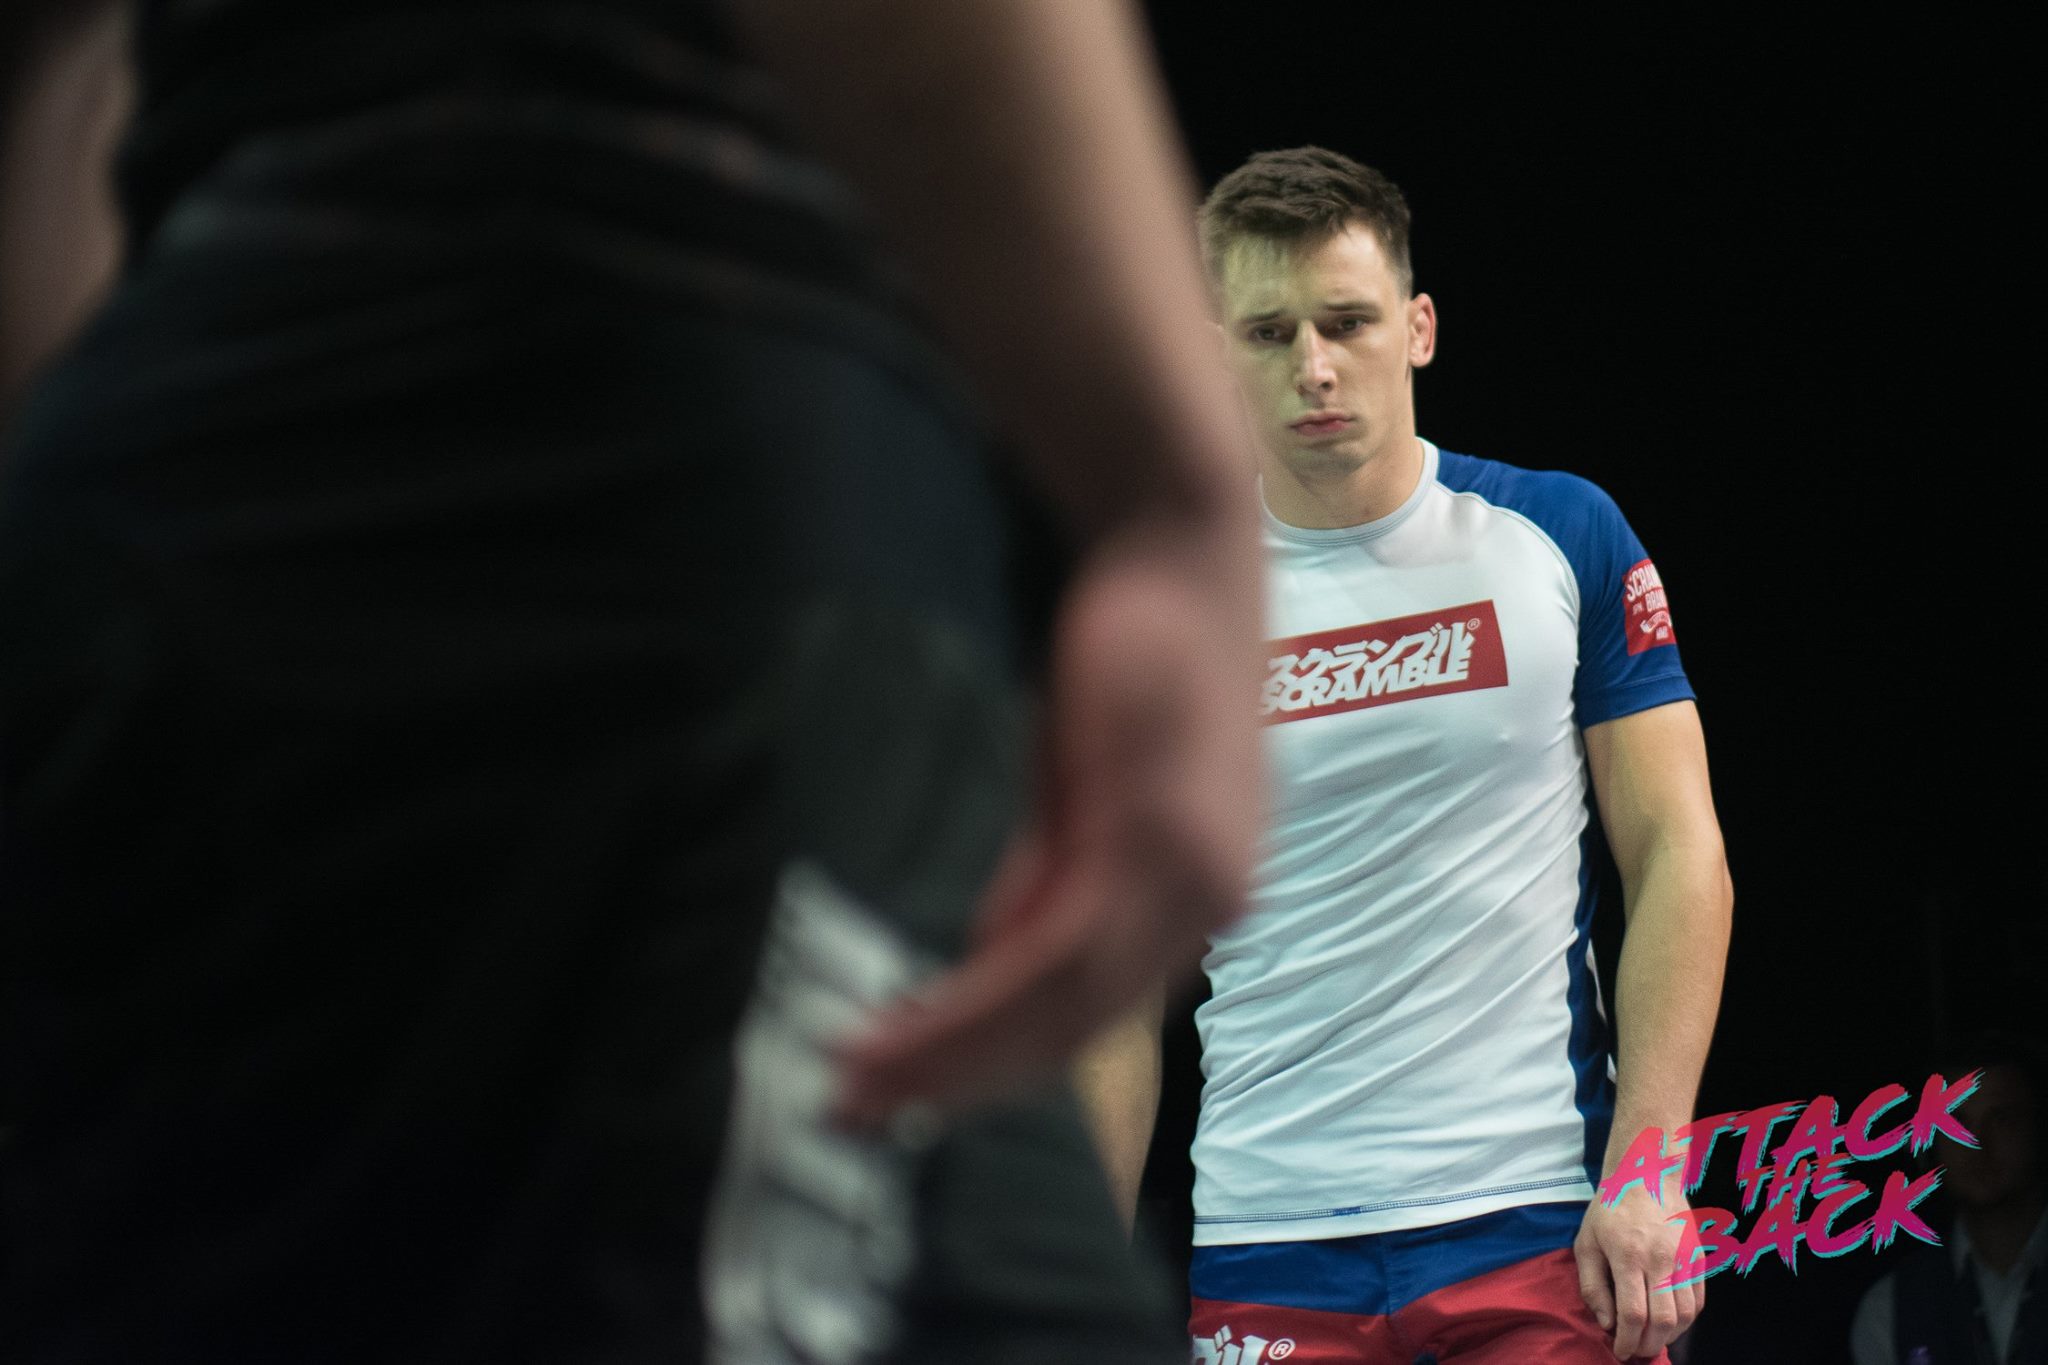 Interview with Miha Perhavec: "Is my grappling better than this man?"